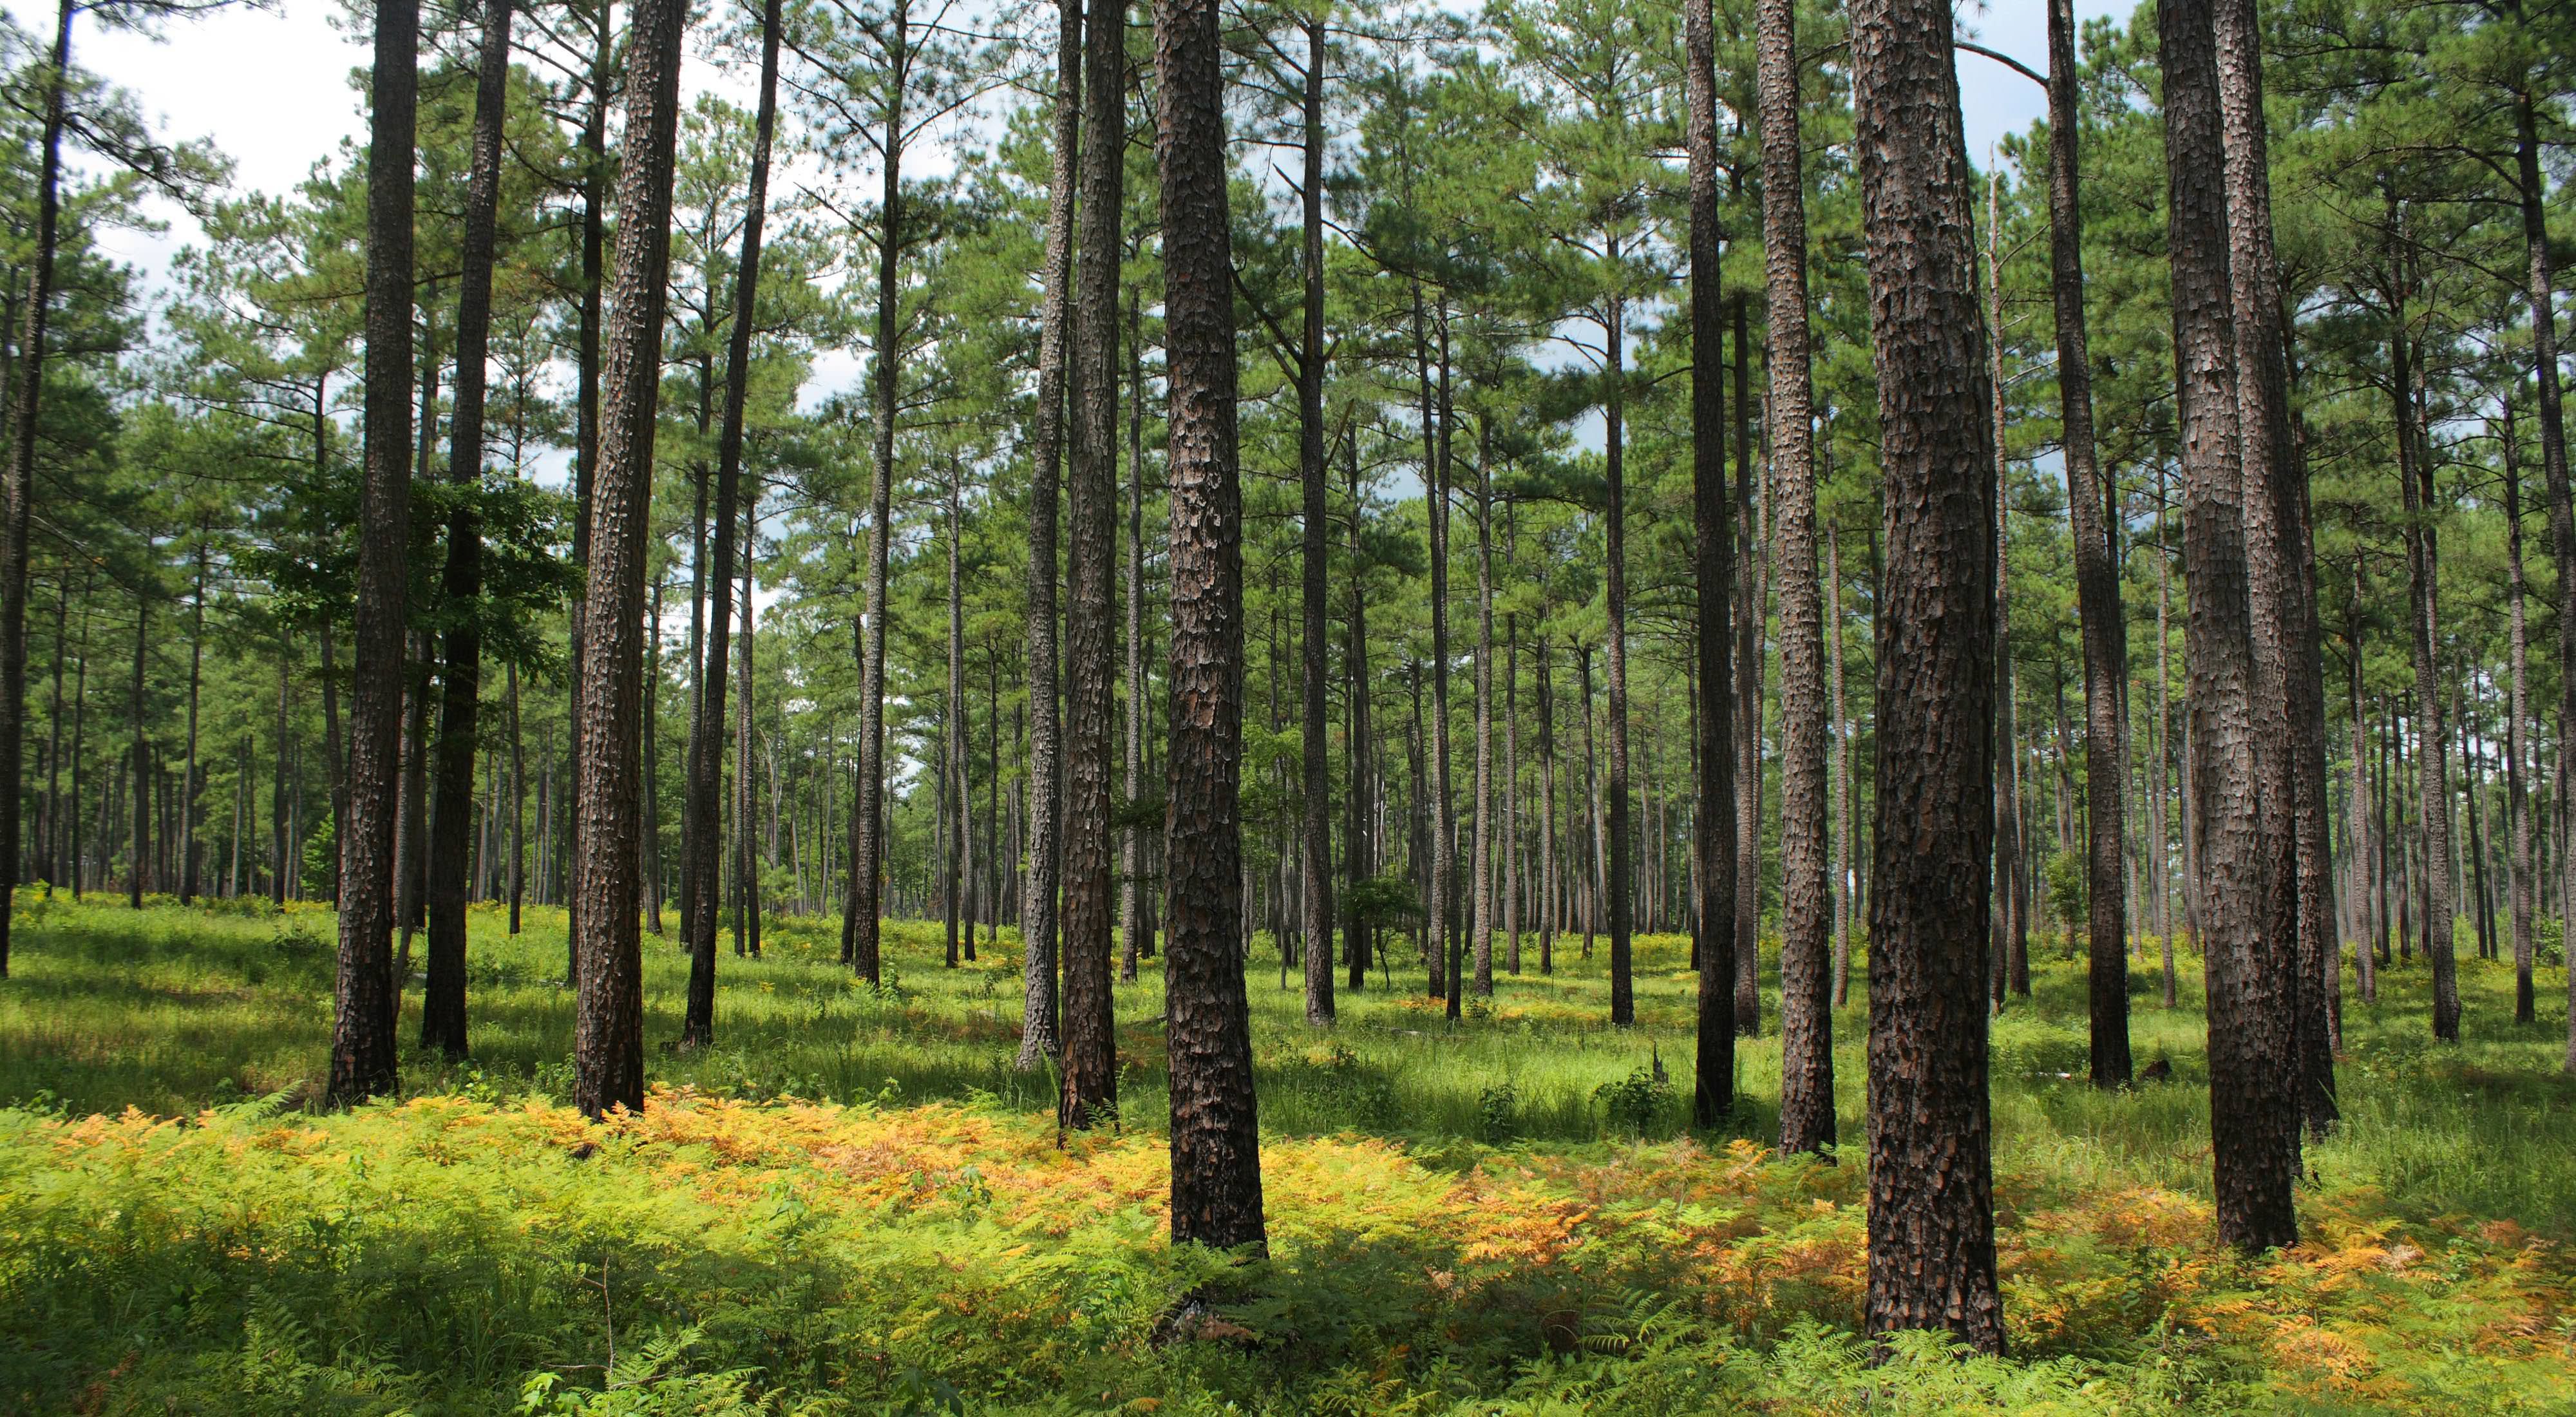 An open pine savanna of tall, widely spaced pine trees with a low understory of thick ferns.